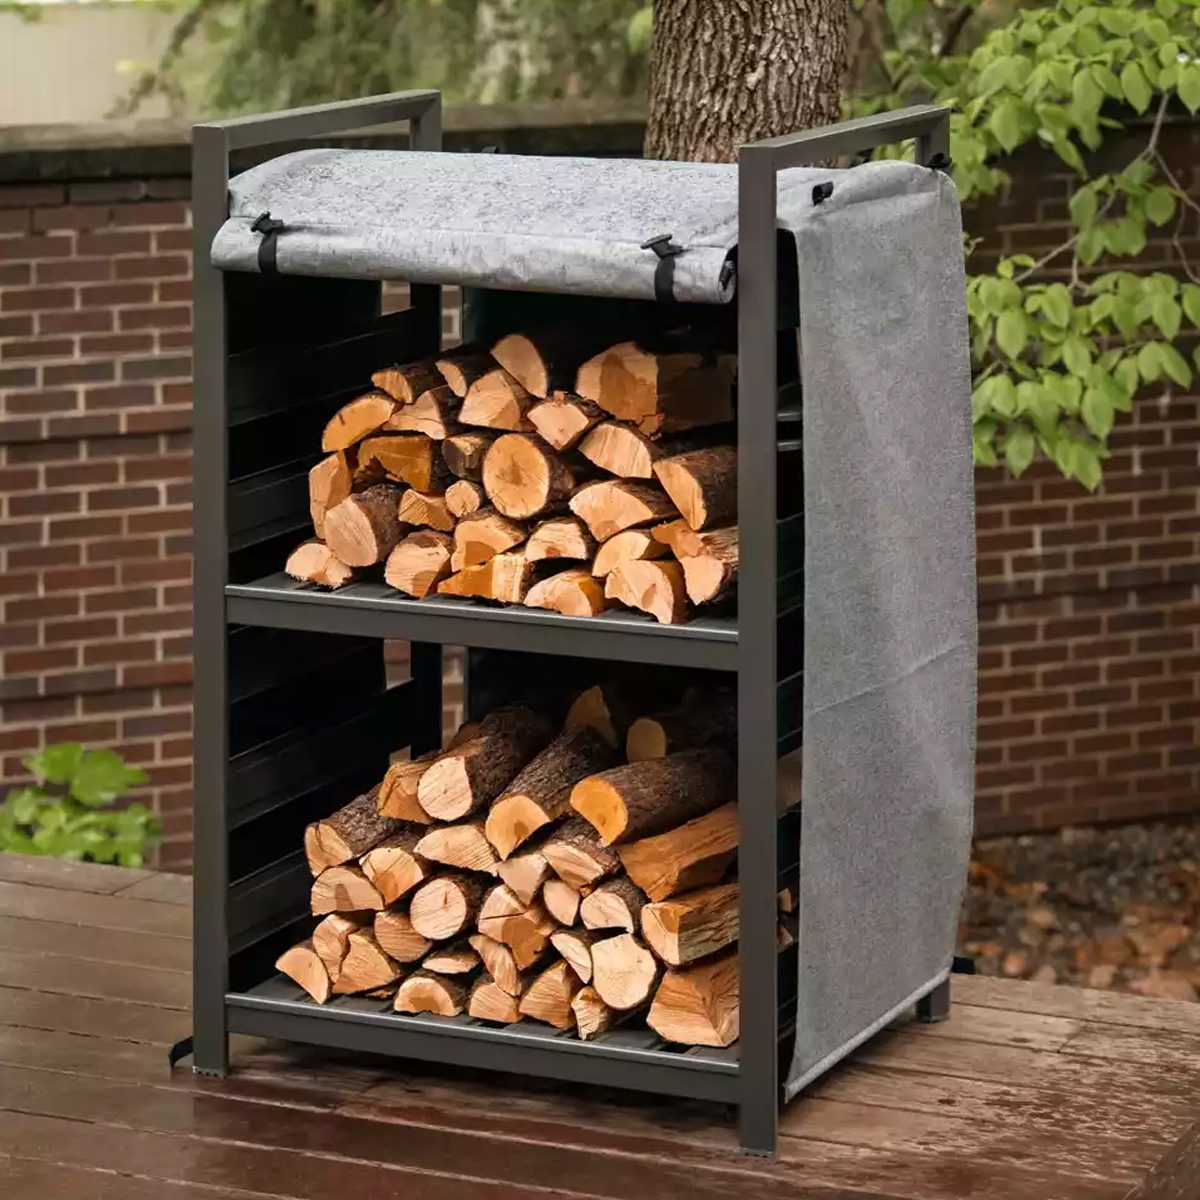 Firewood rack outdoor 2 tier firewood holder indoor stacking firewood storage rack with removable hanging hooks easy to assemble fireplace small wood stackers for patio backyard fire pit 